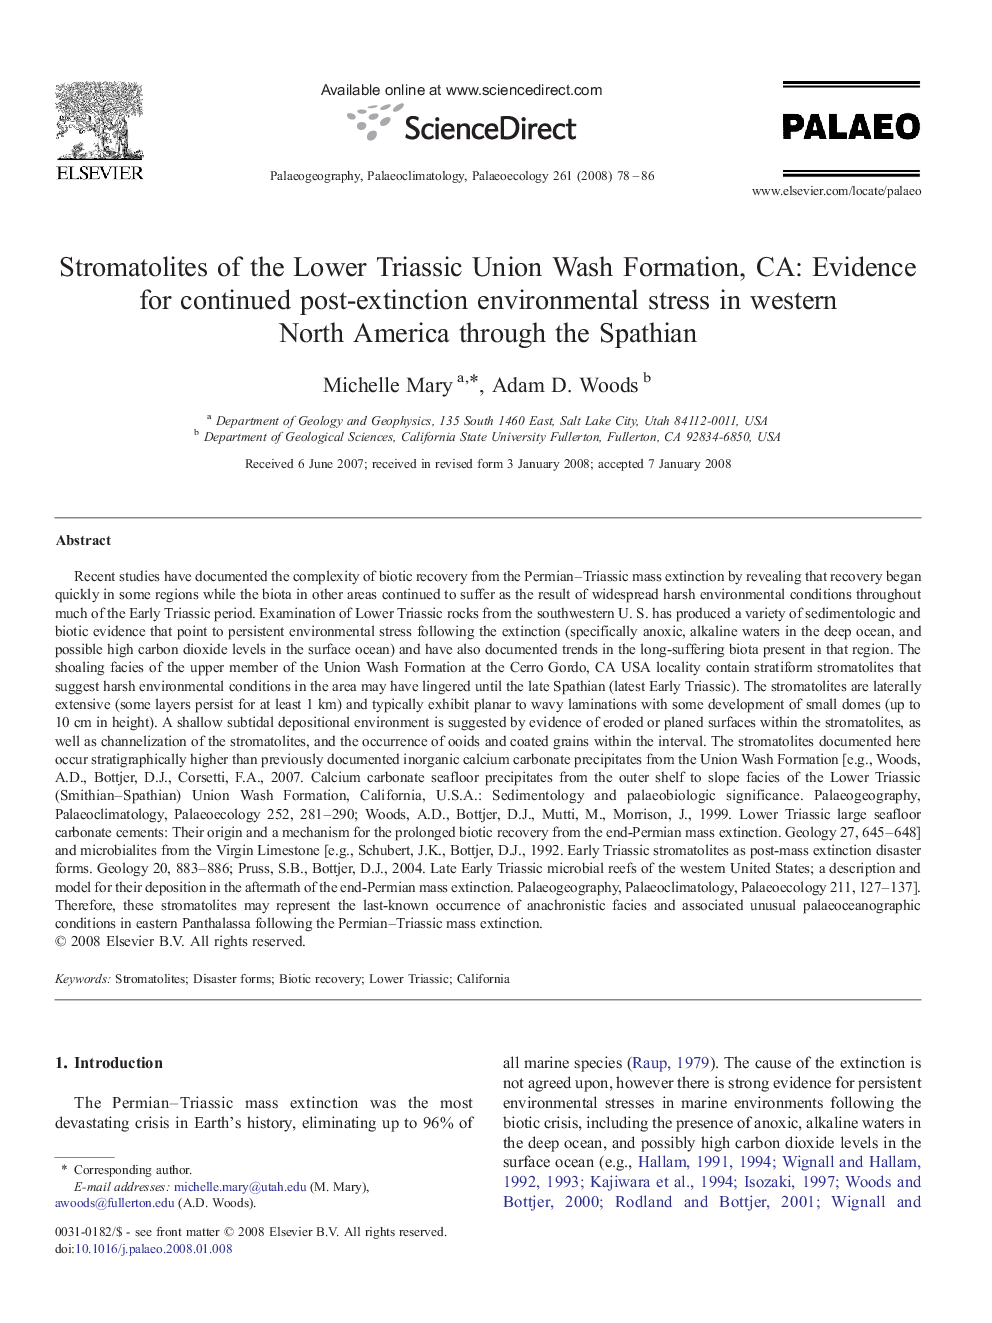 Stromatolites of the Lower Triassic Union Wash Formation, CA: Evidence for continued post-extinction environmental stress in western North America through the Spathian